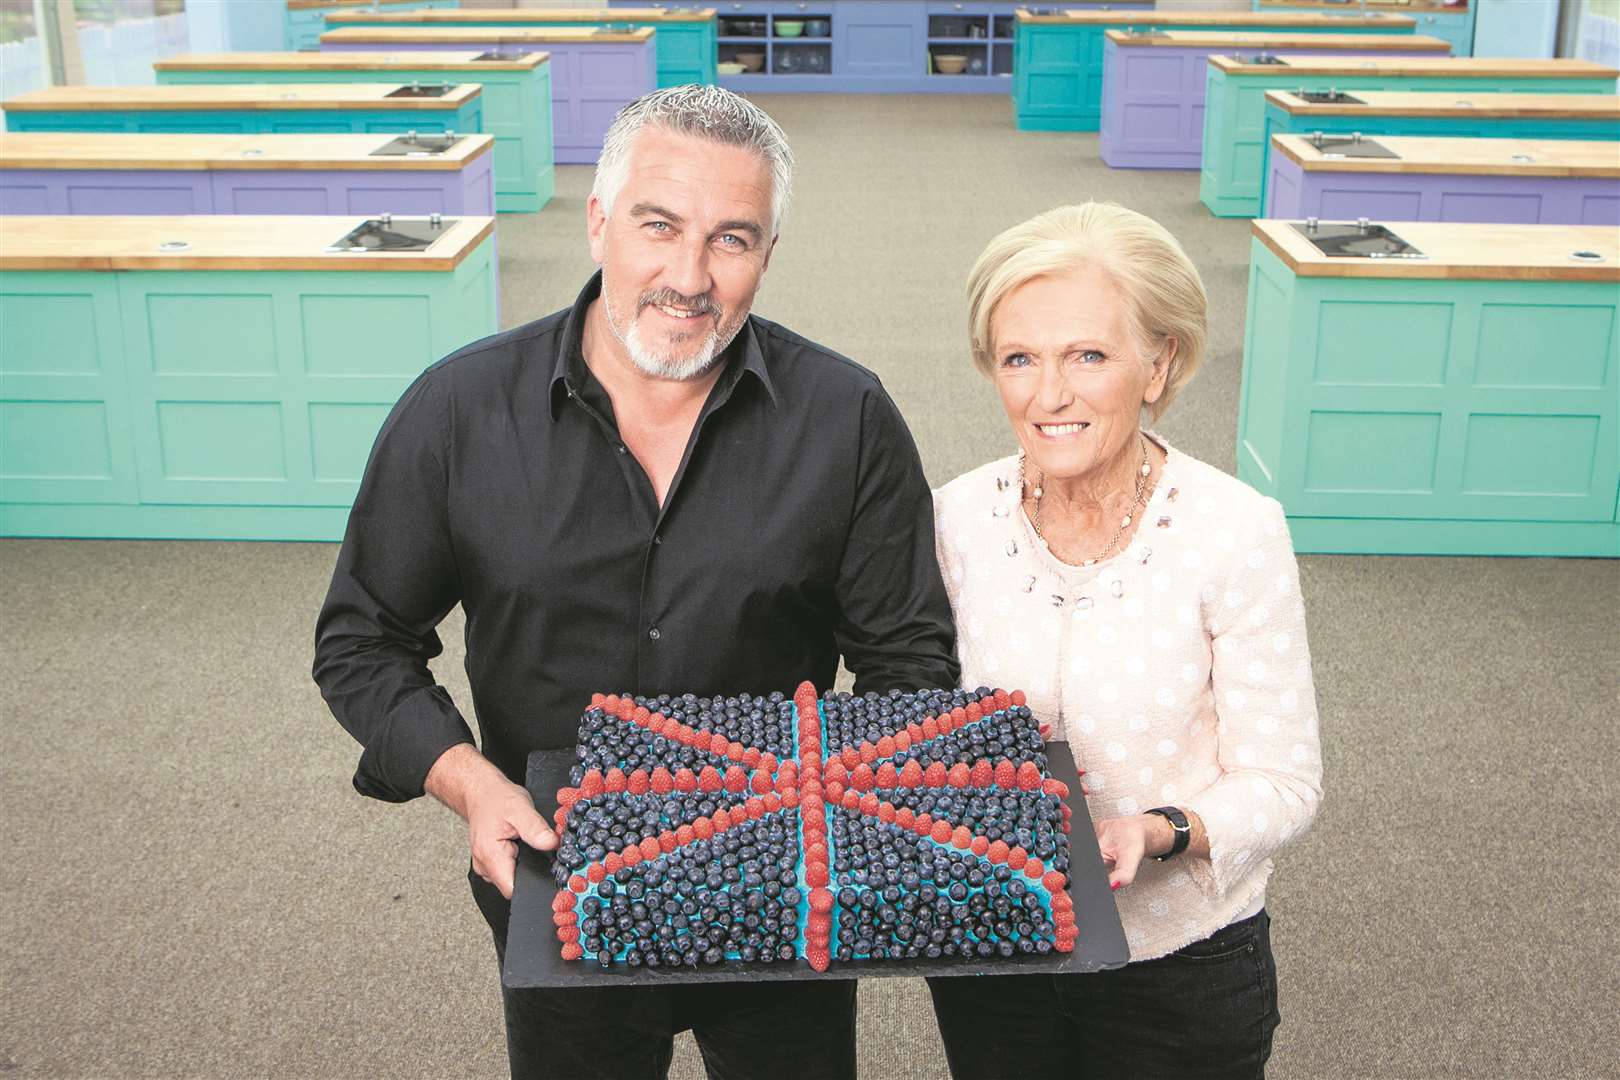 The Great British Bake Off, starring Wingham-based presenter Paul Hollywood and Mary Berry, returns to TV screens tonight. Picture: BBC/Mark Bourdillon